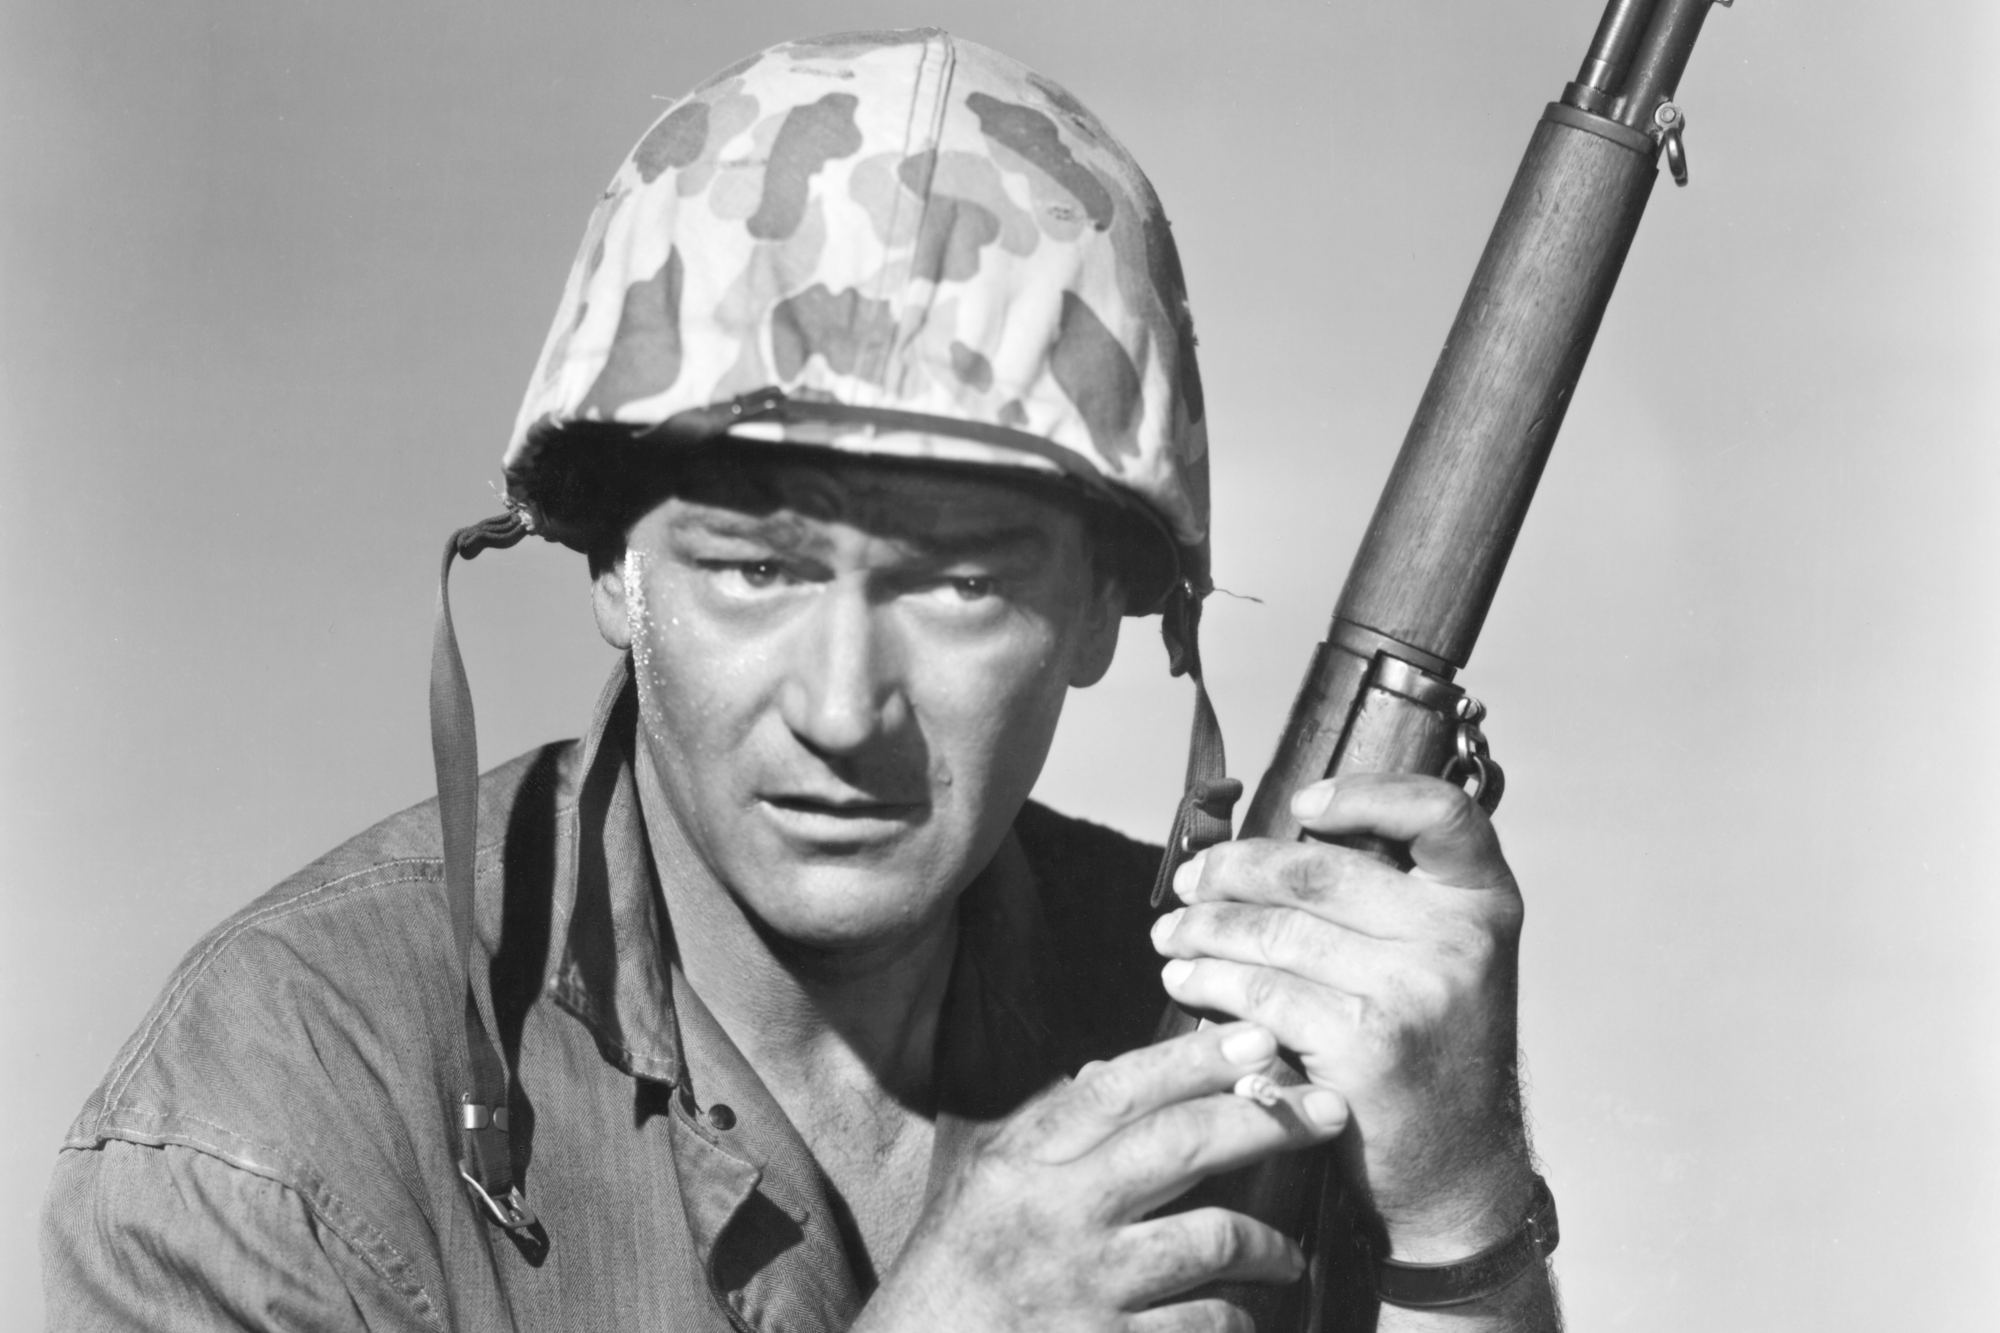 'Sands of Iwo Jima' John Wayne as Sgt. John M. Stryker in war movies. He's holding a gun, wearing his military uniform in a black-and-white picture.